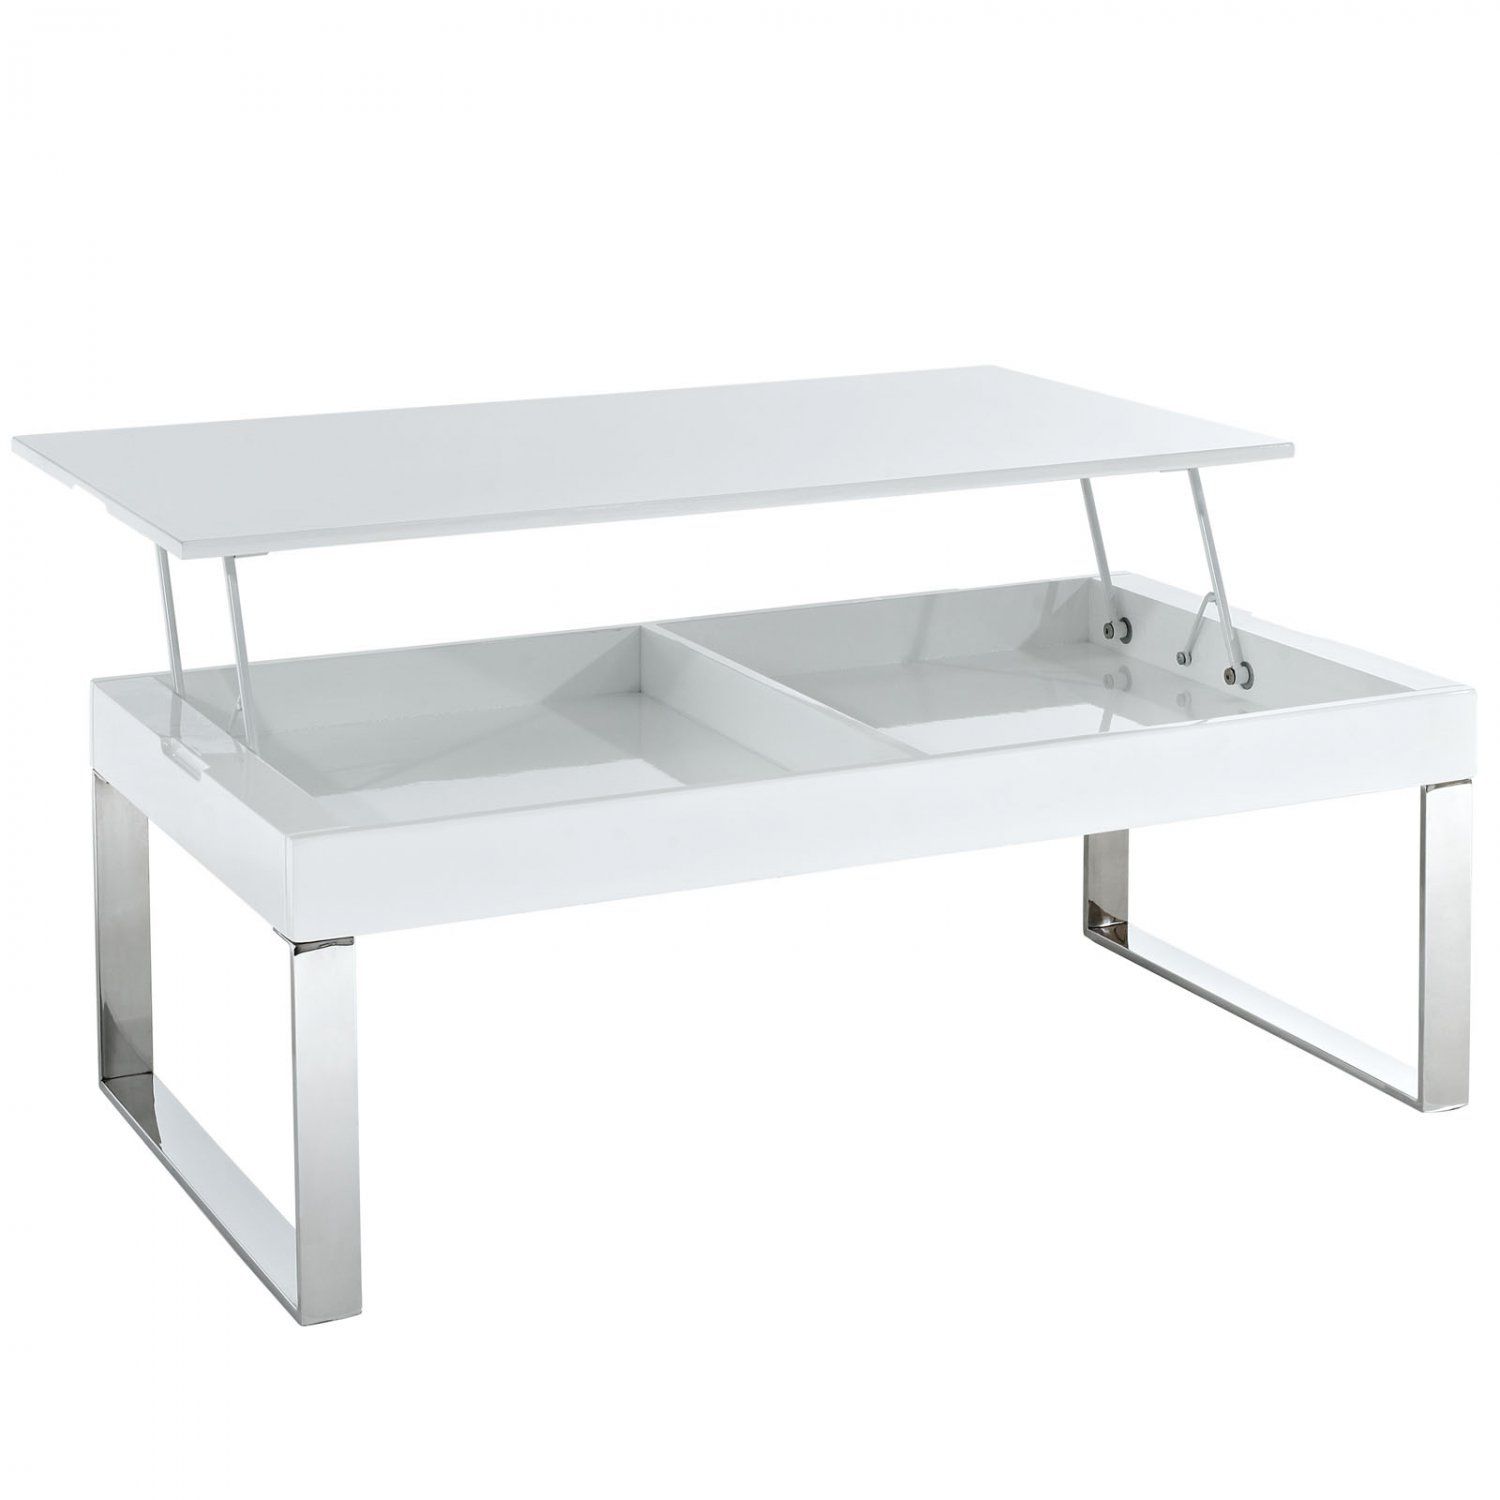 White Gloss Lift Coffee Table Intended For High Gloss Lift Top Coffee Tables (Gallery 8 of 21)